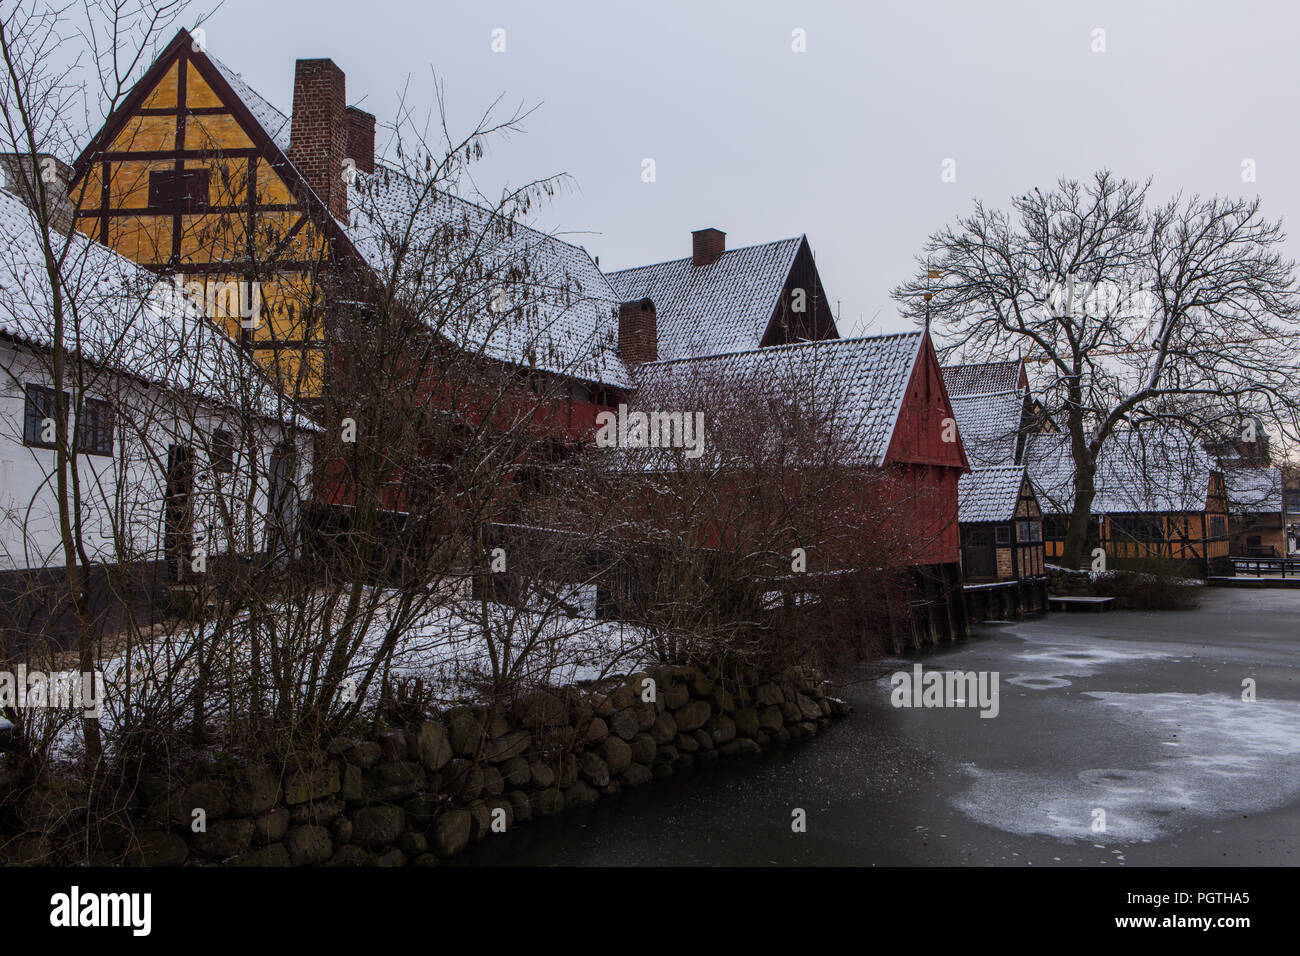 Den Gamle By Freilichtmuseum Banque D'Images